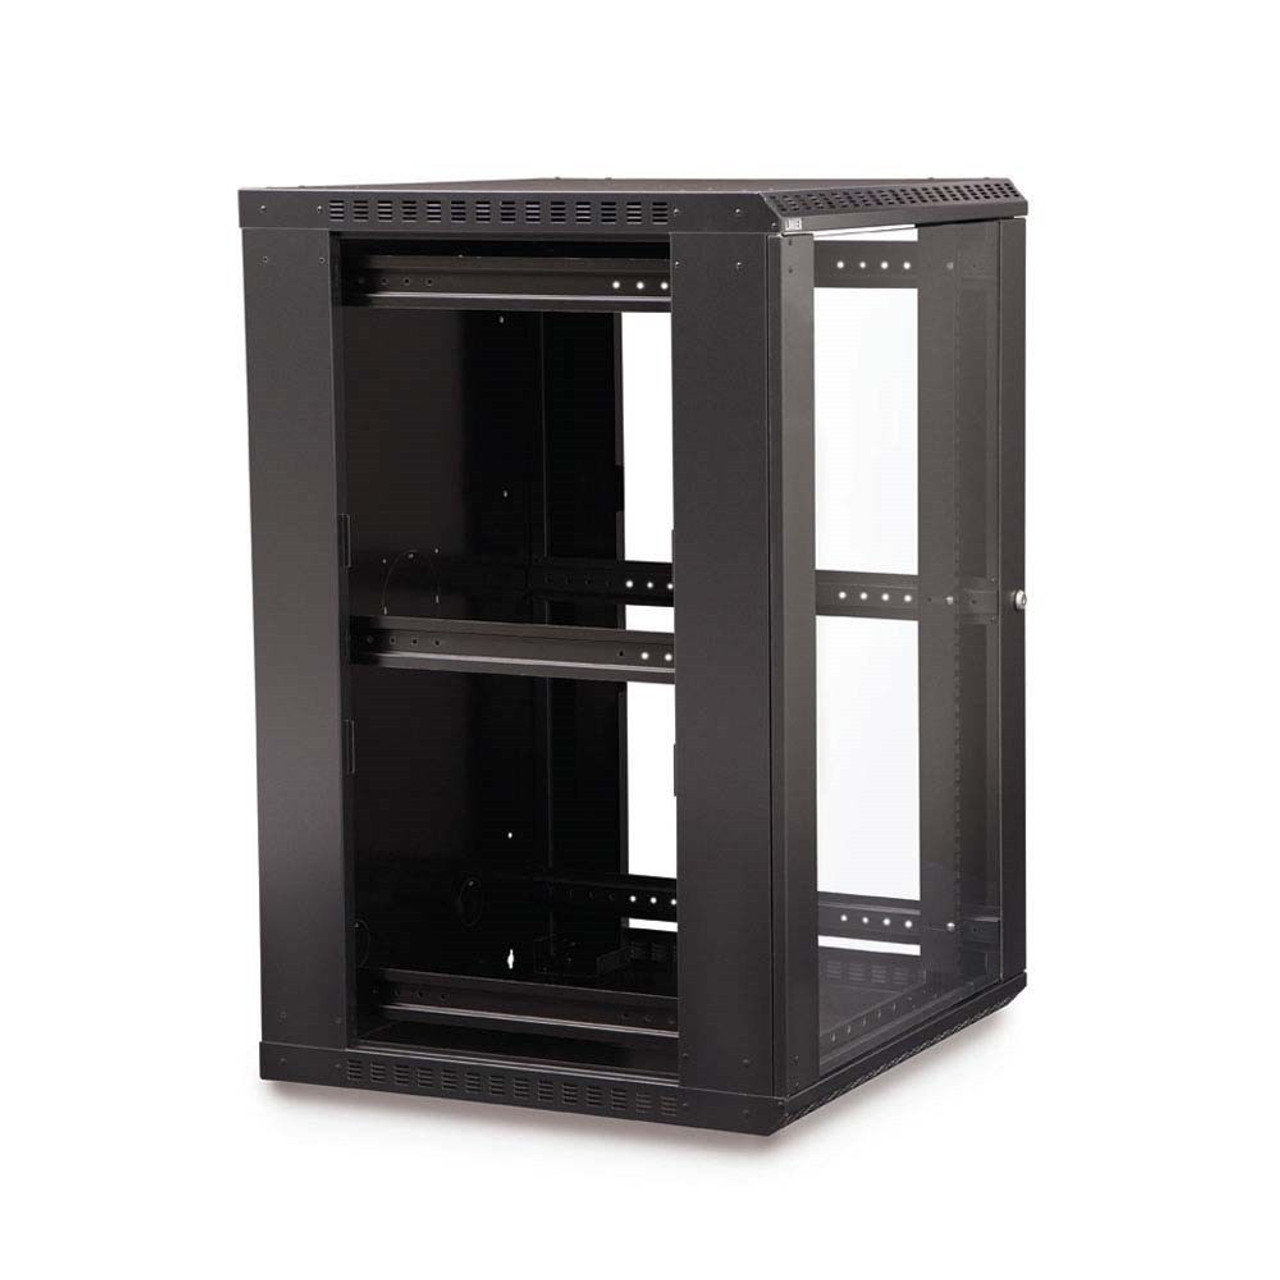 Linier Fixed Wall Mounted Cabinets Server Rack